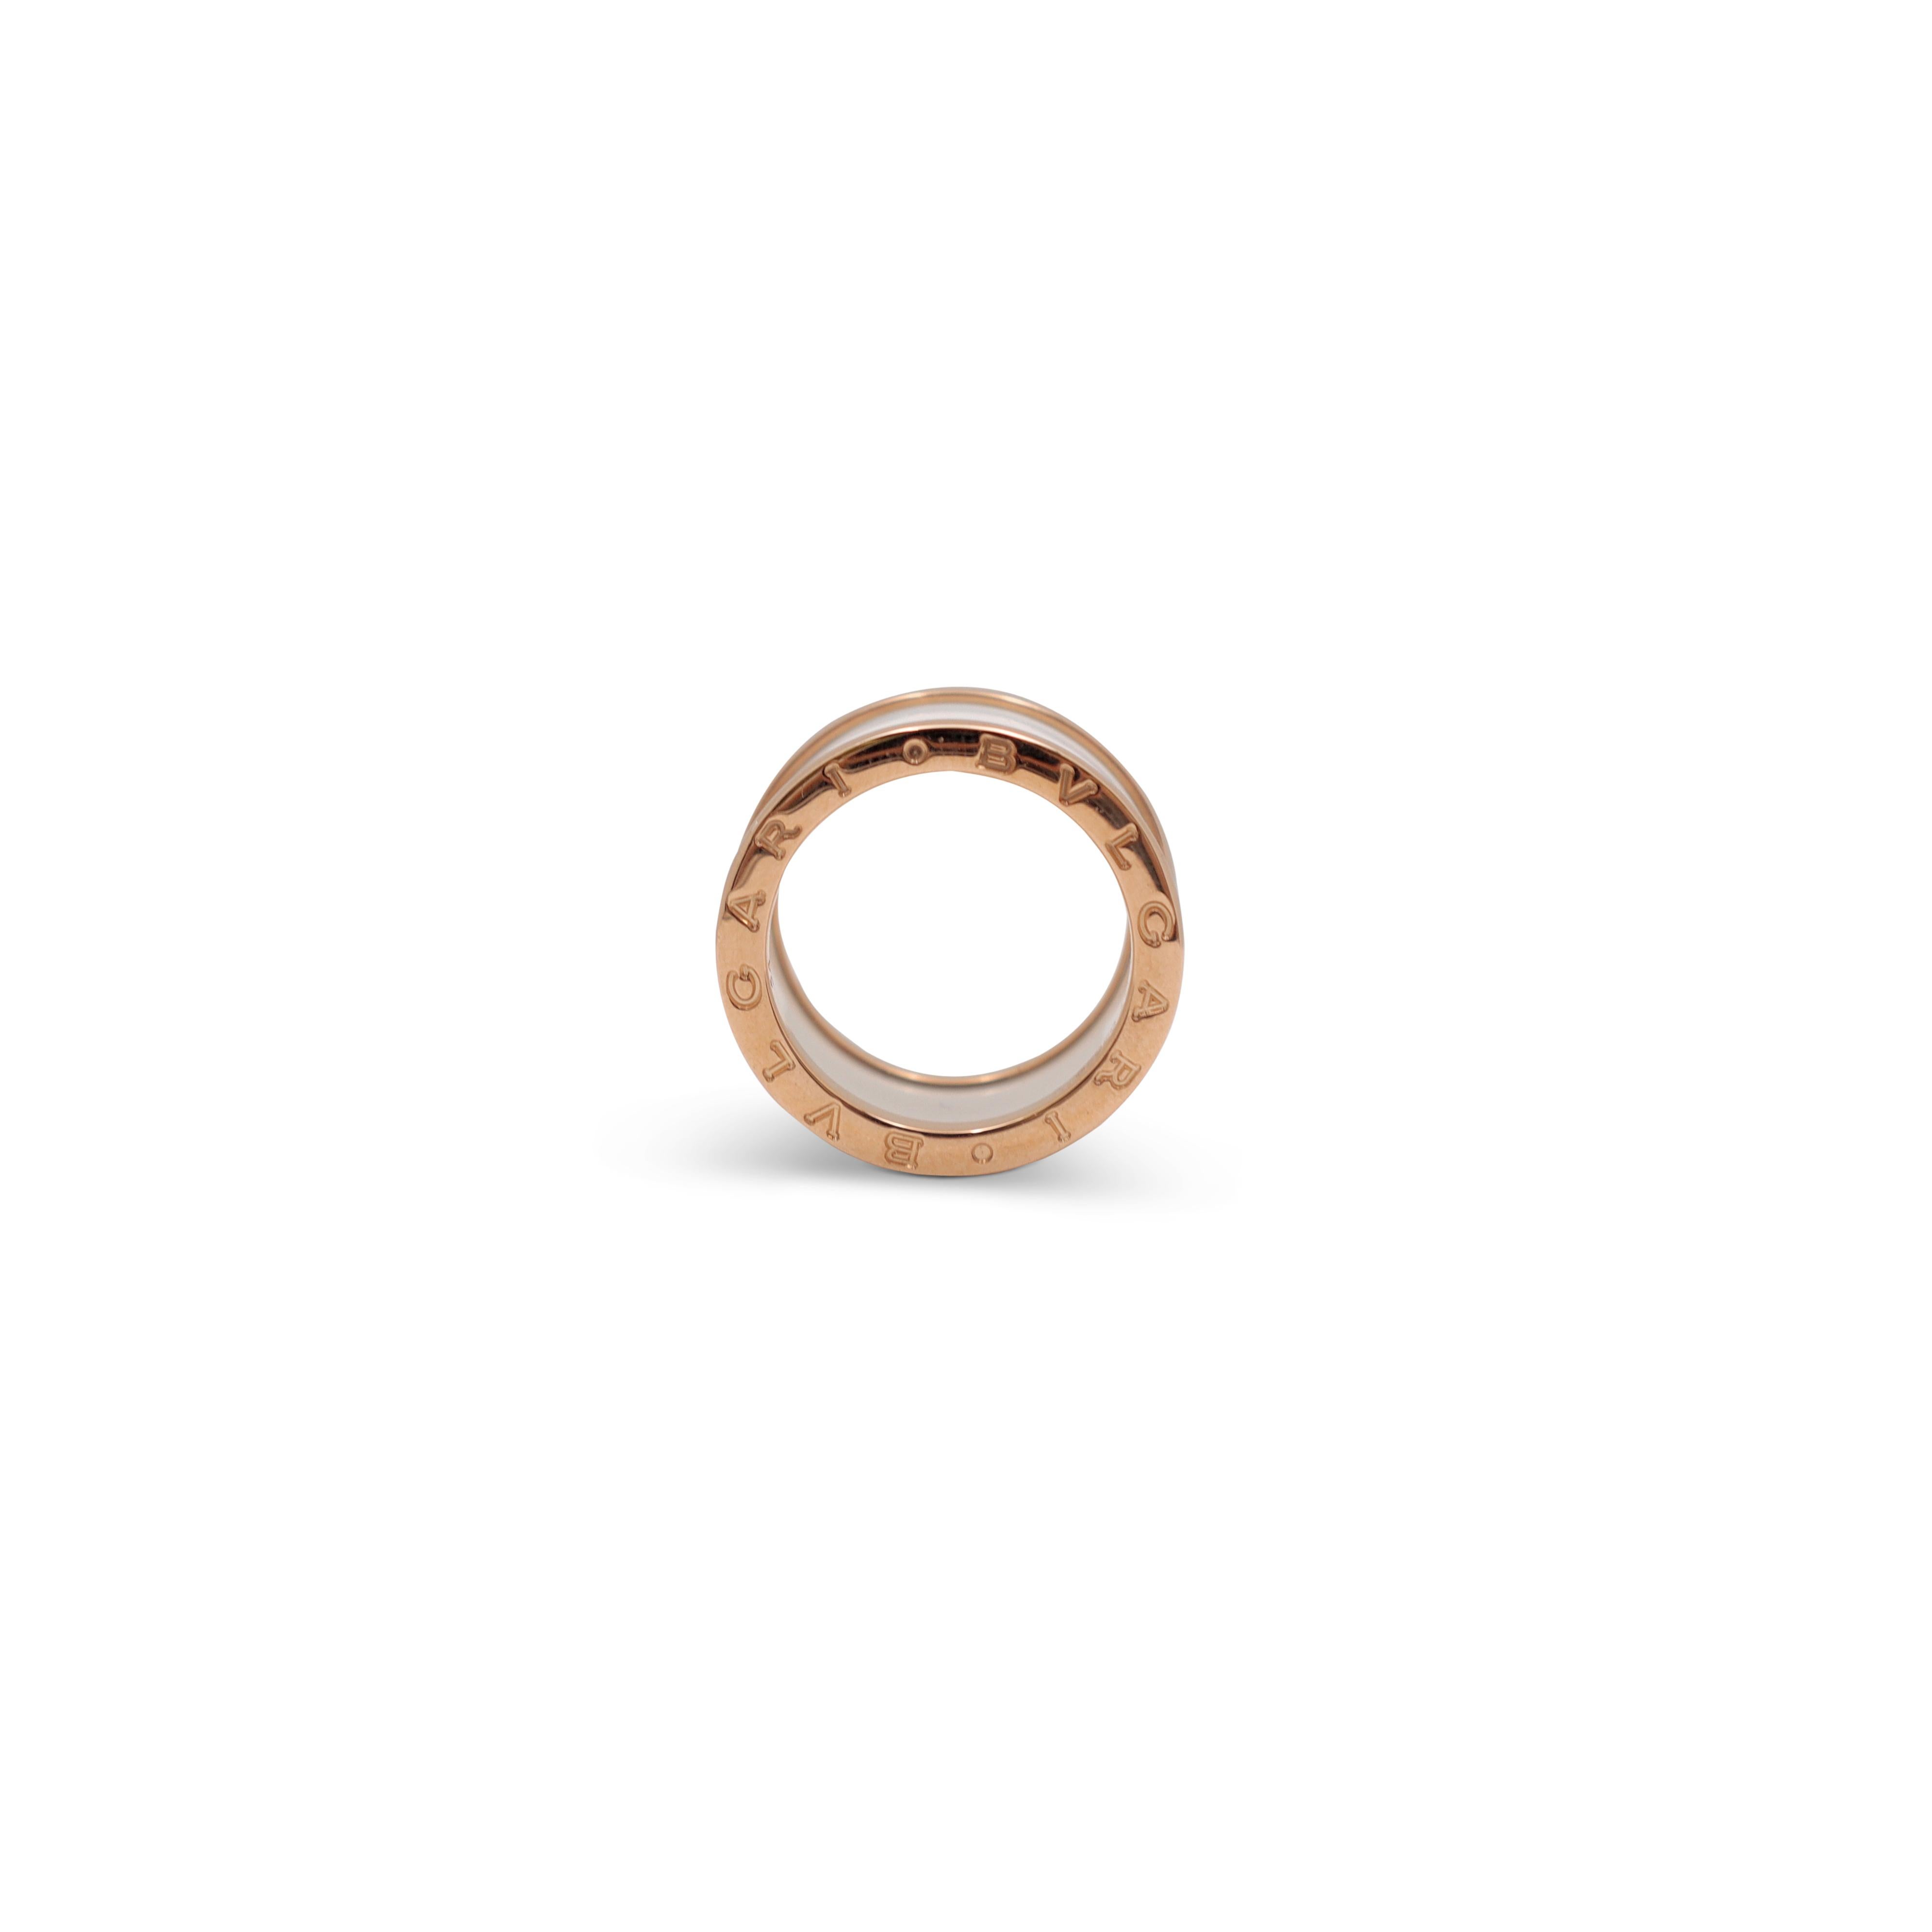 Authentic classic Bvlgari B.Zero1 ring crafted in 18 karat rose gold and white ceramic features the house's distinctive spiral born of the tubogas technique. Signed Bvlgari, 750, 54, Made in Italy. Ring size 54, US 6 3/4. The ring is not presented